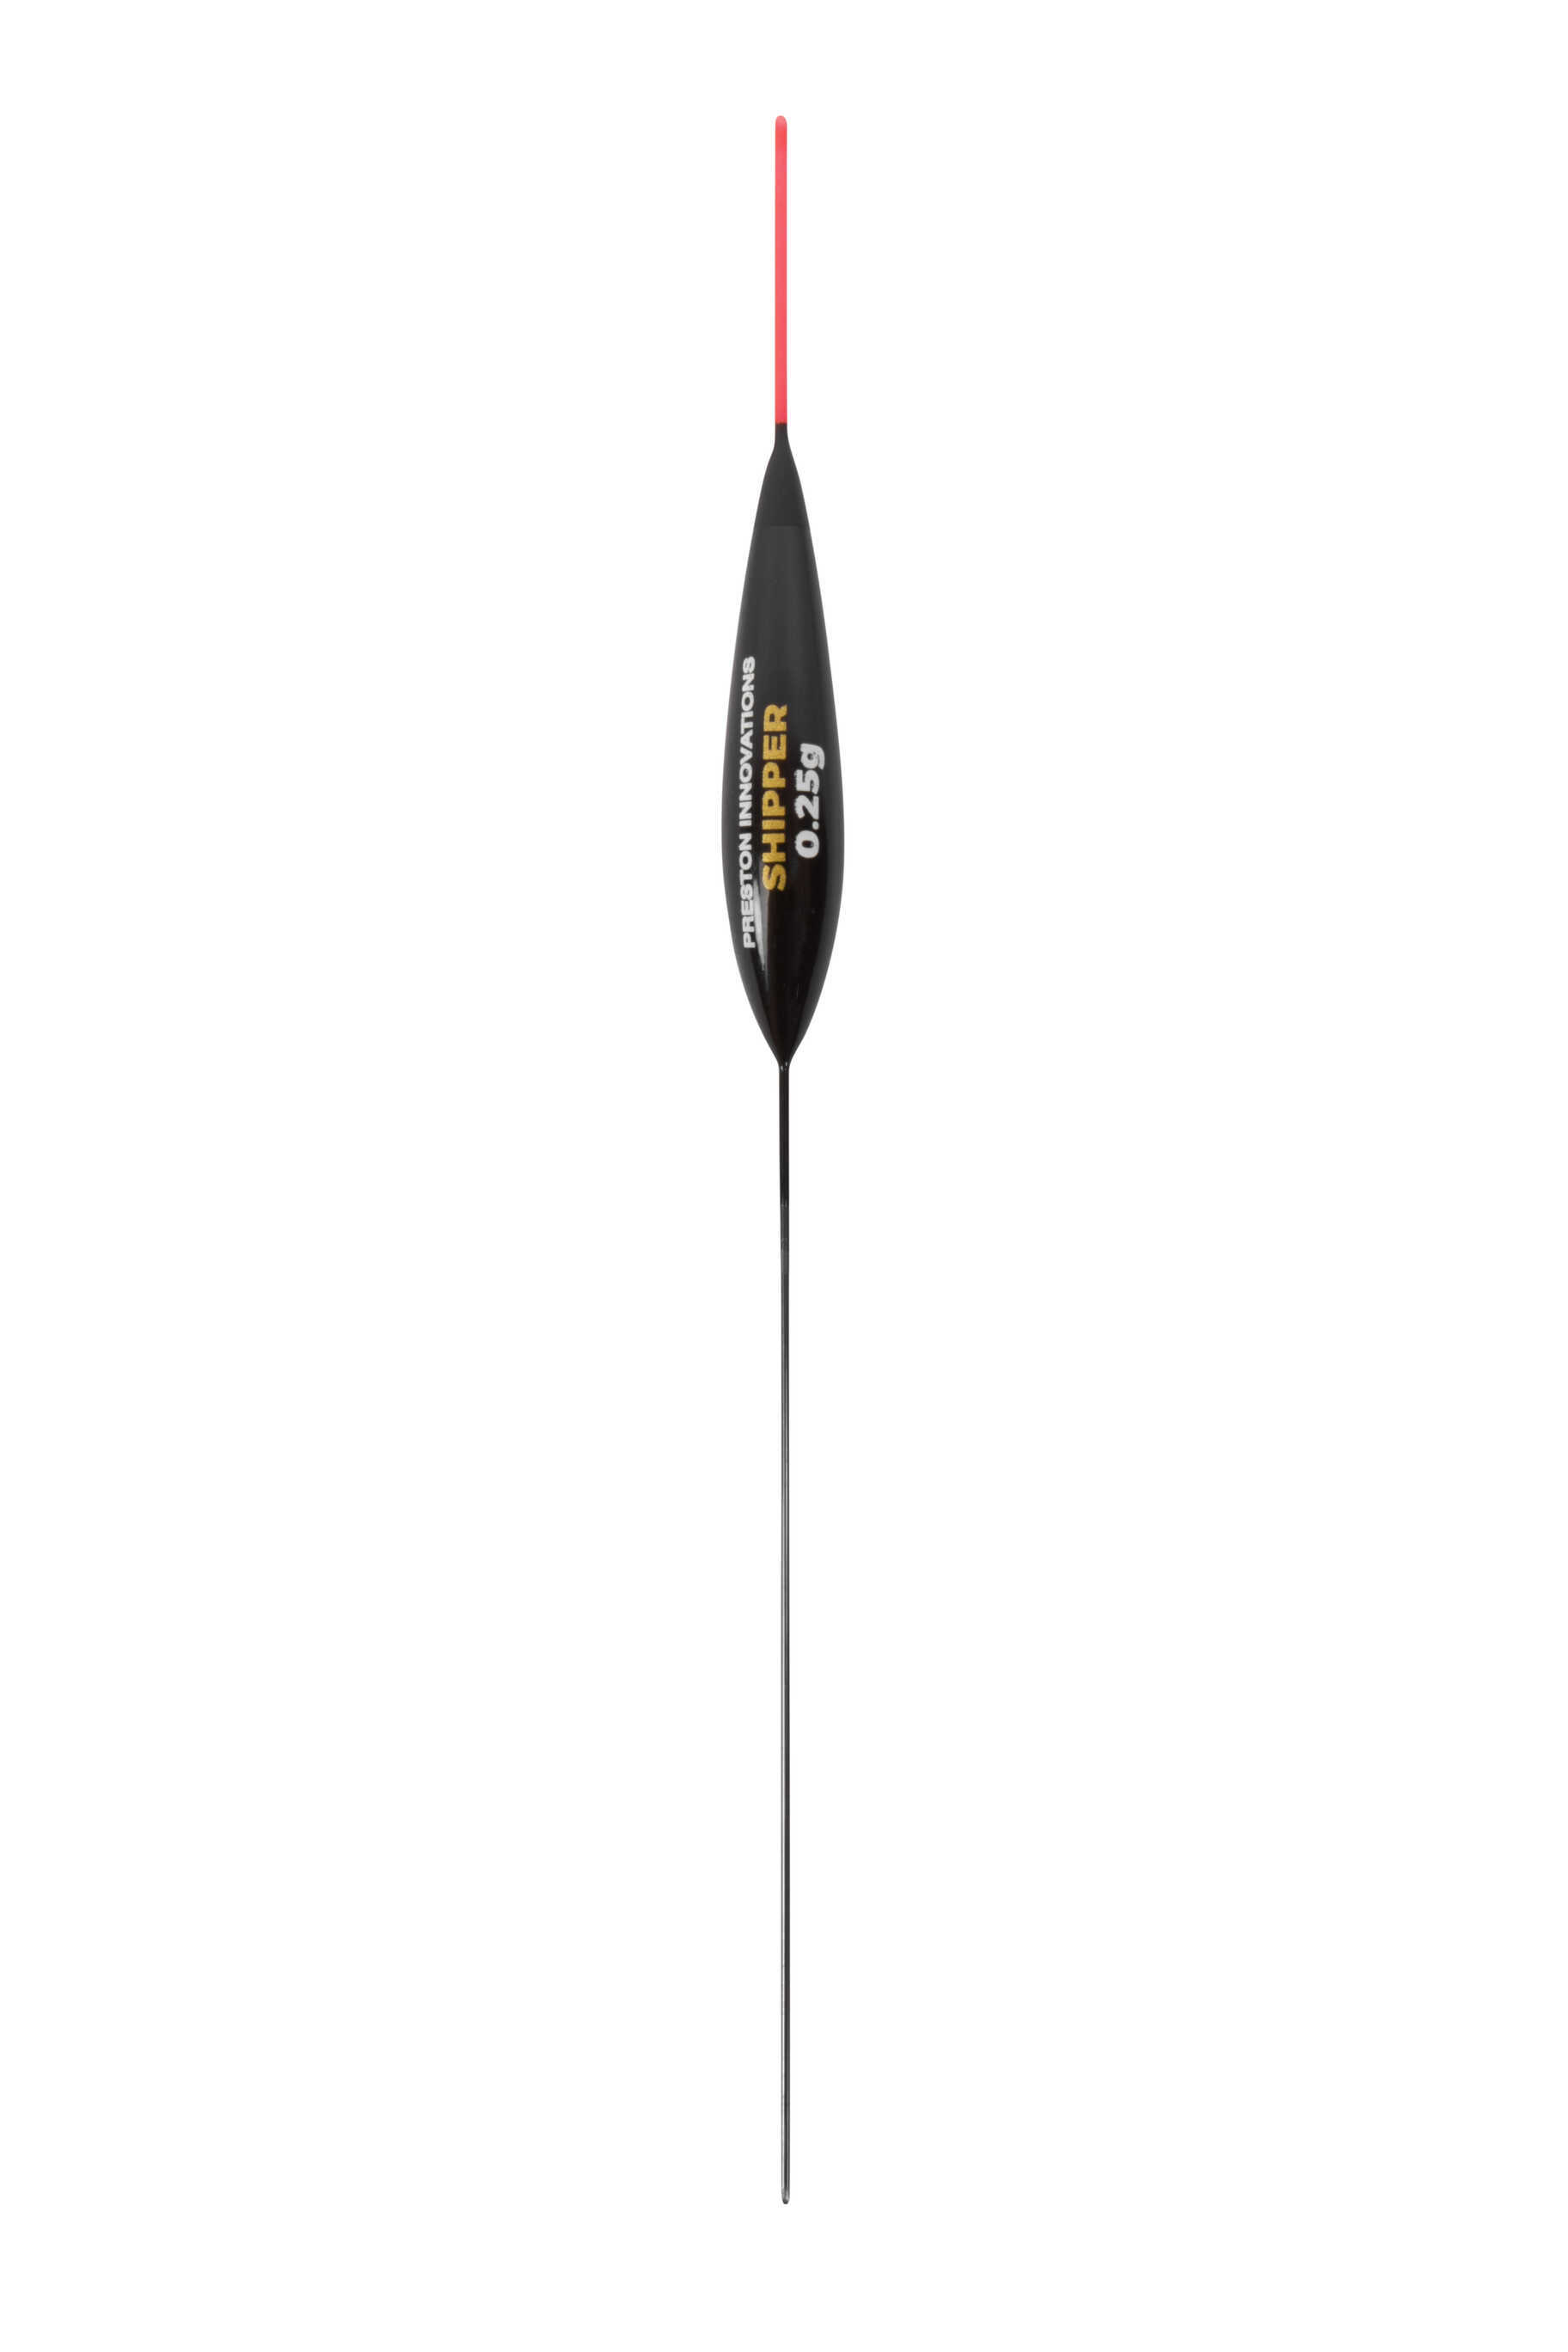 Shipper Pole Floats, UK Match Fishing Tackle For True Anglers